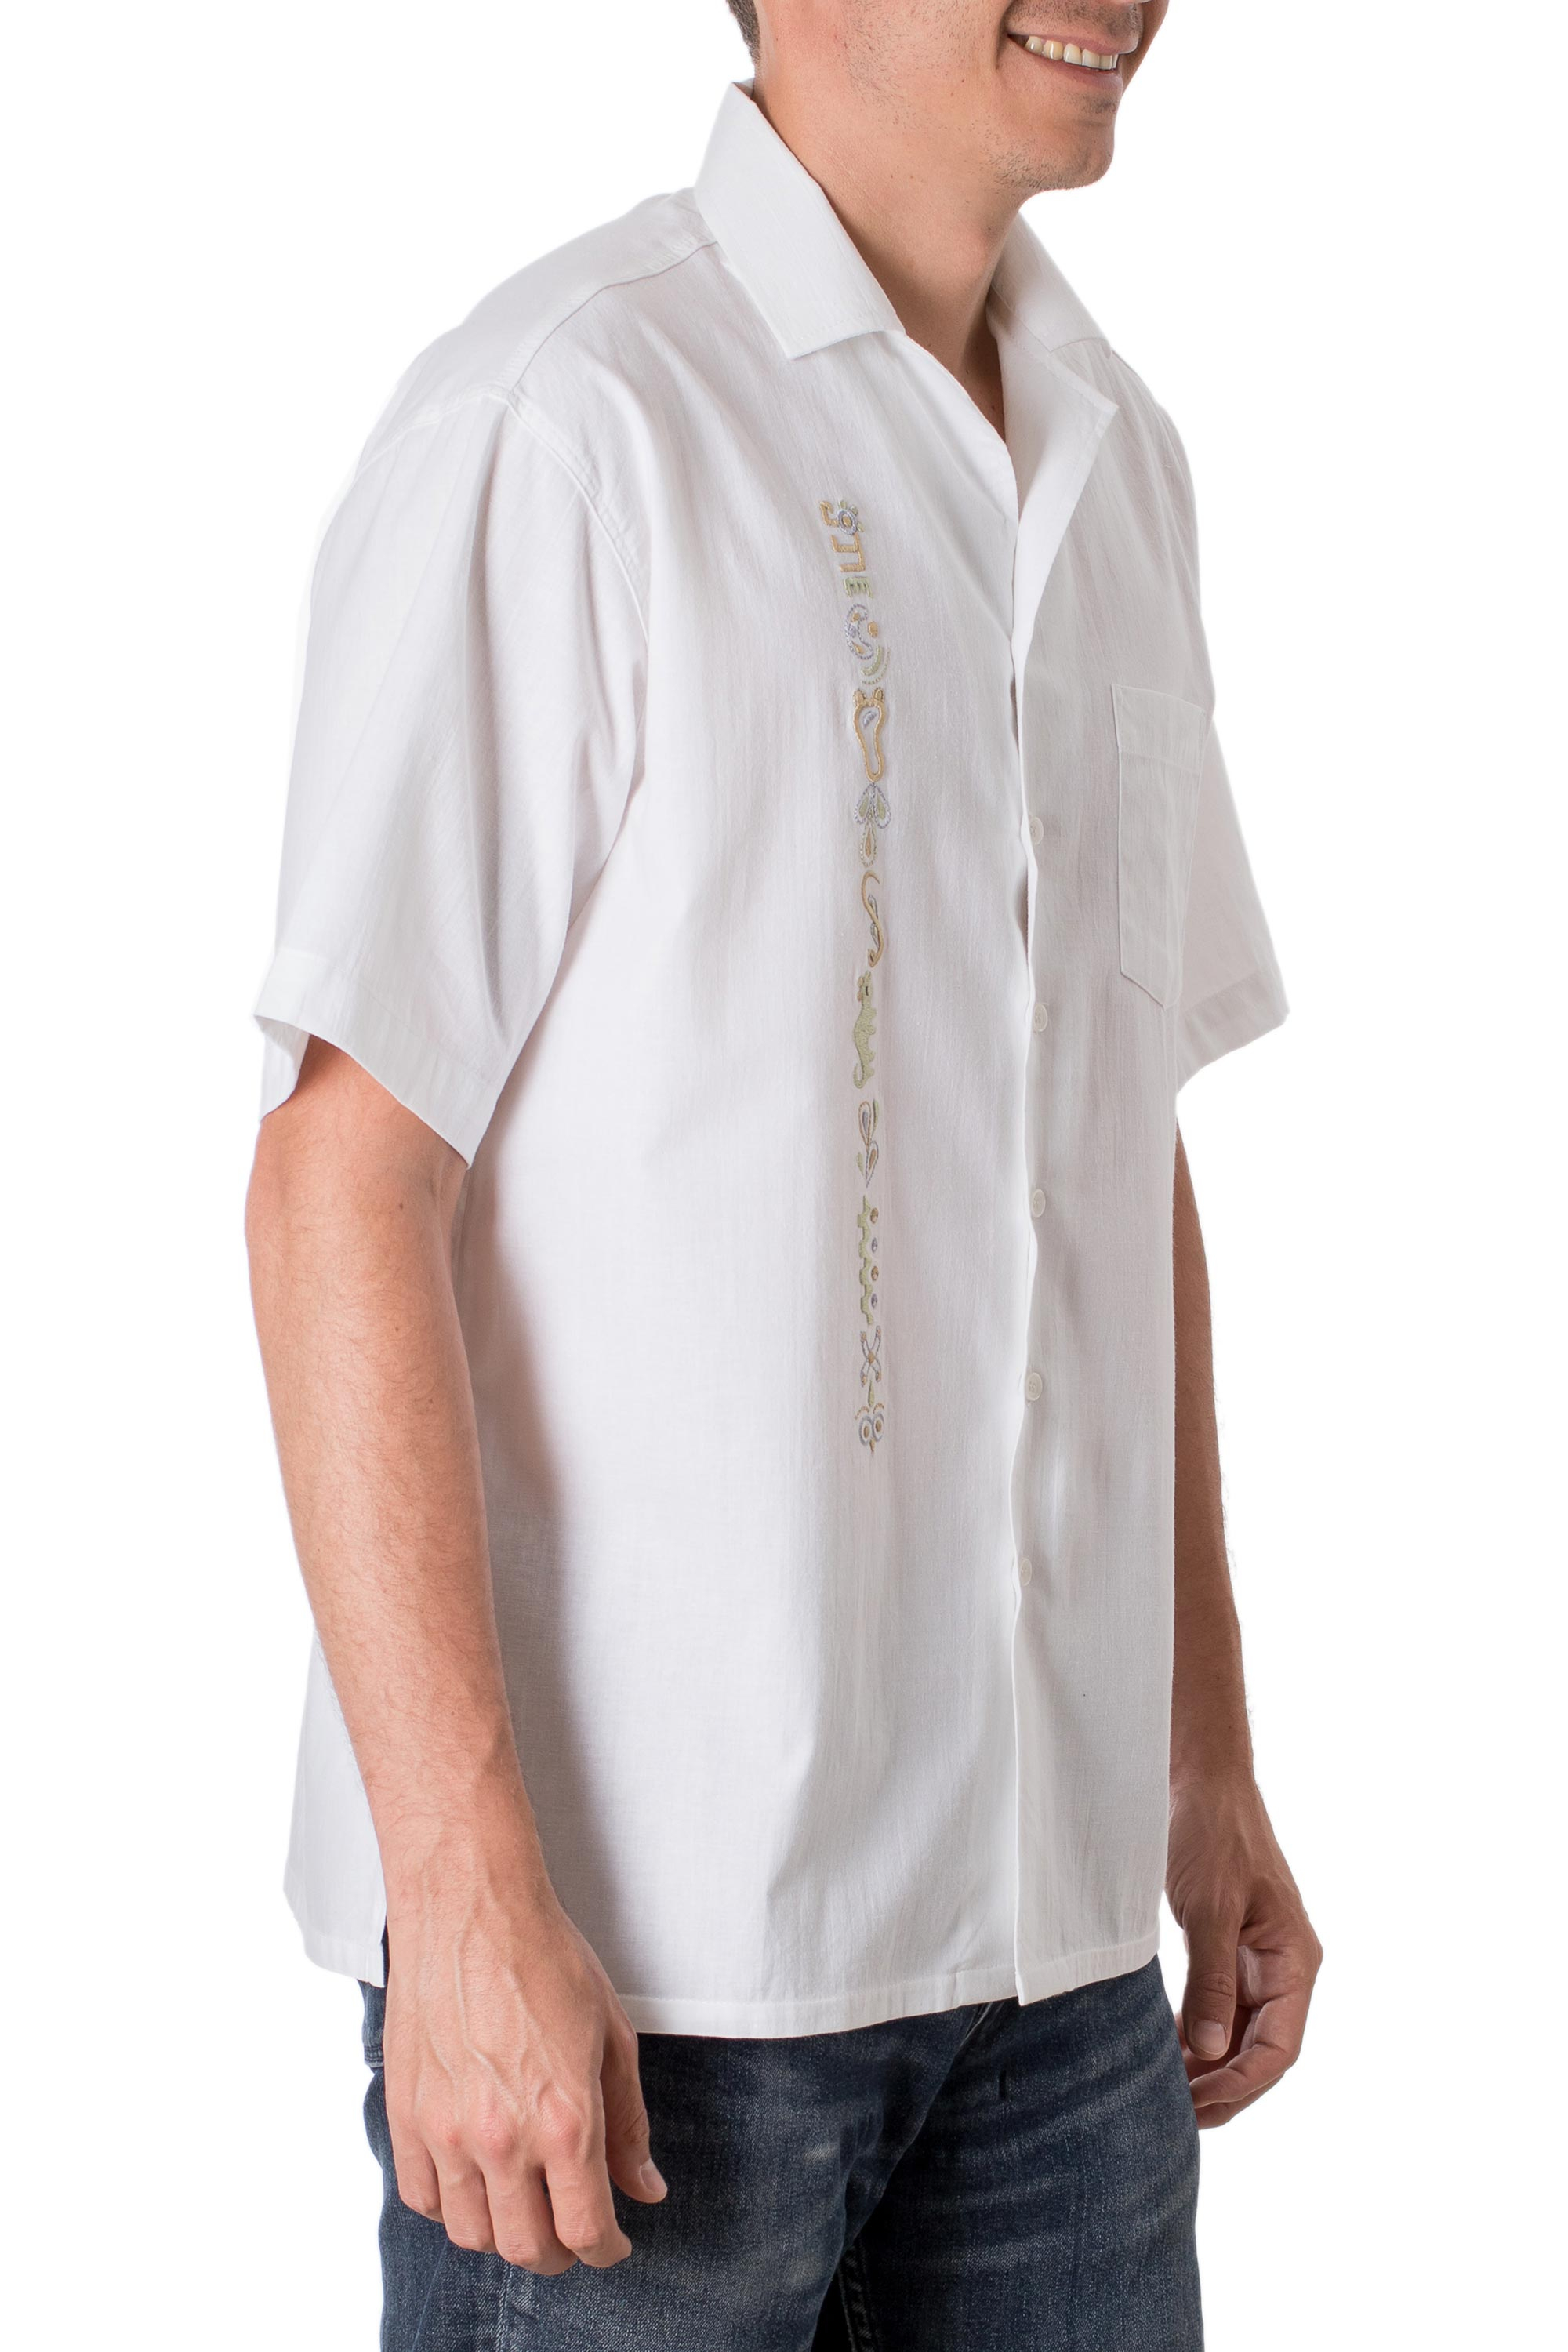 UNICEF Market | Embroidered Men's Cotton Guayabera Shirt from El ...